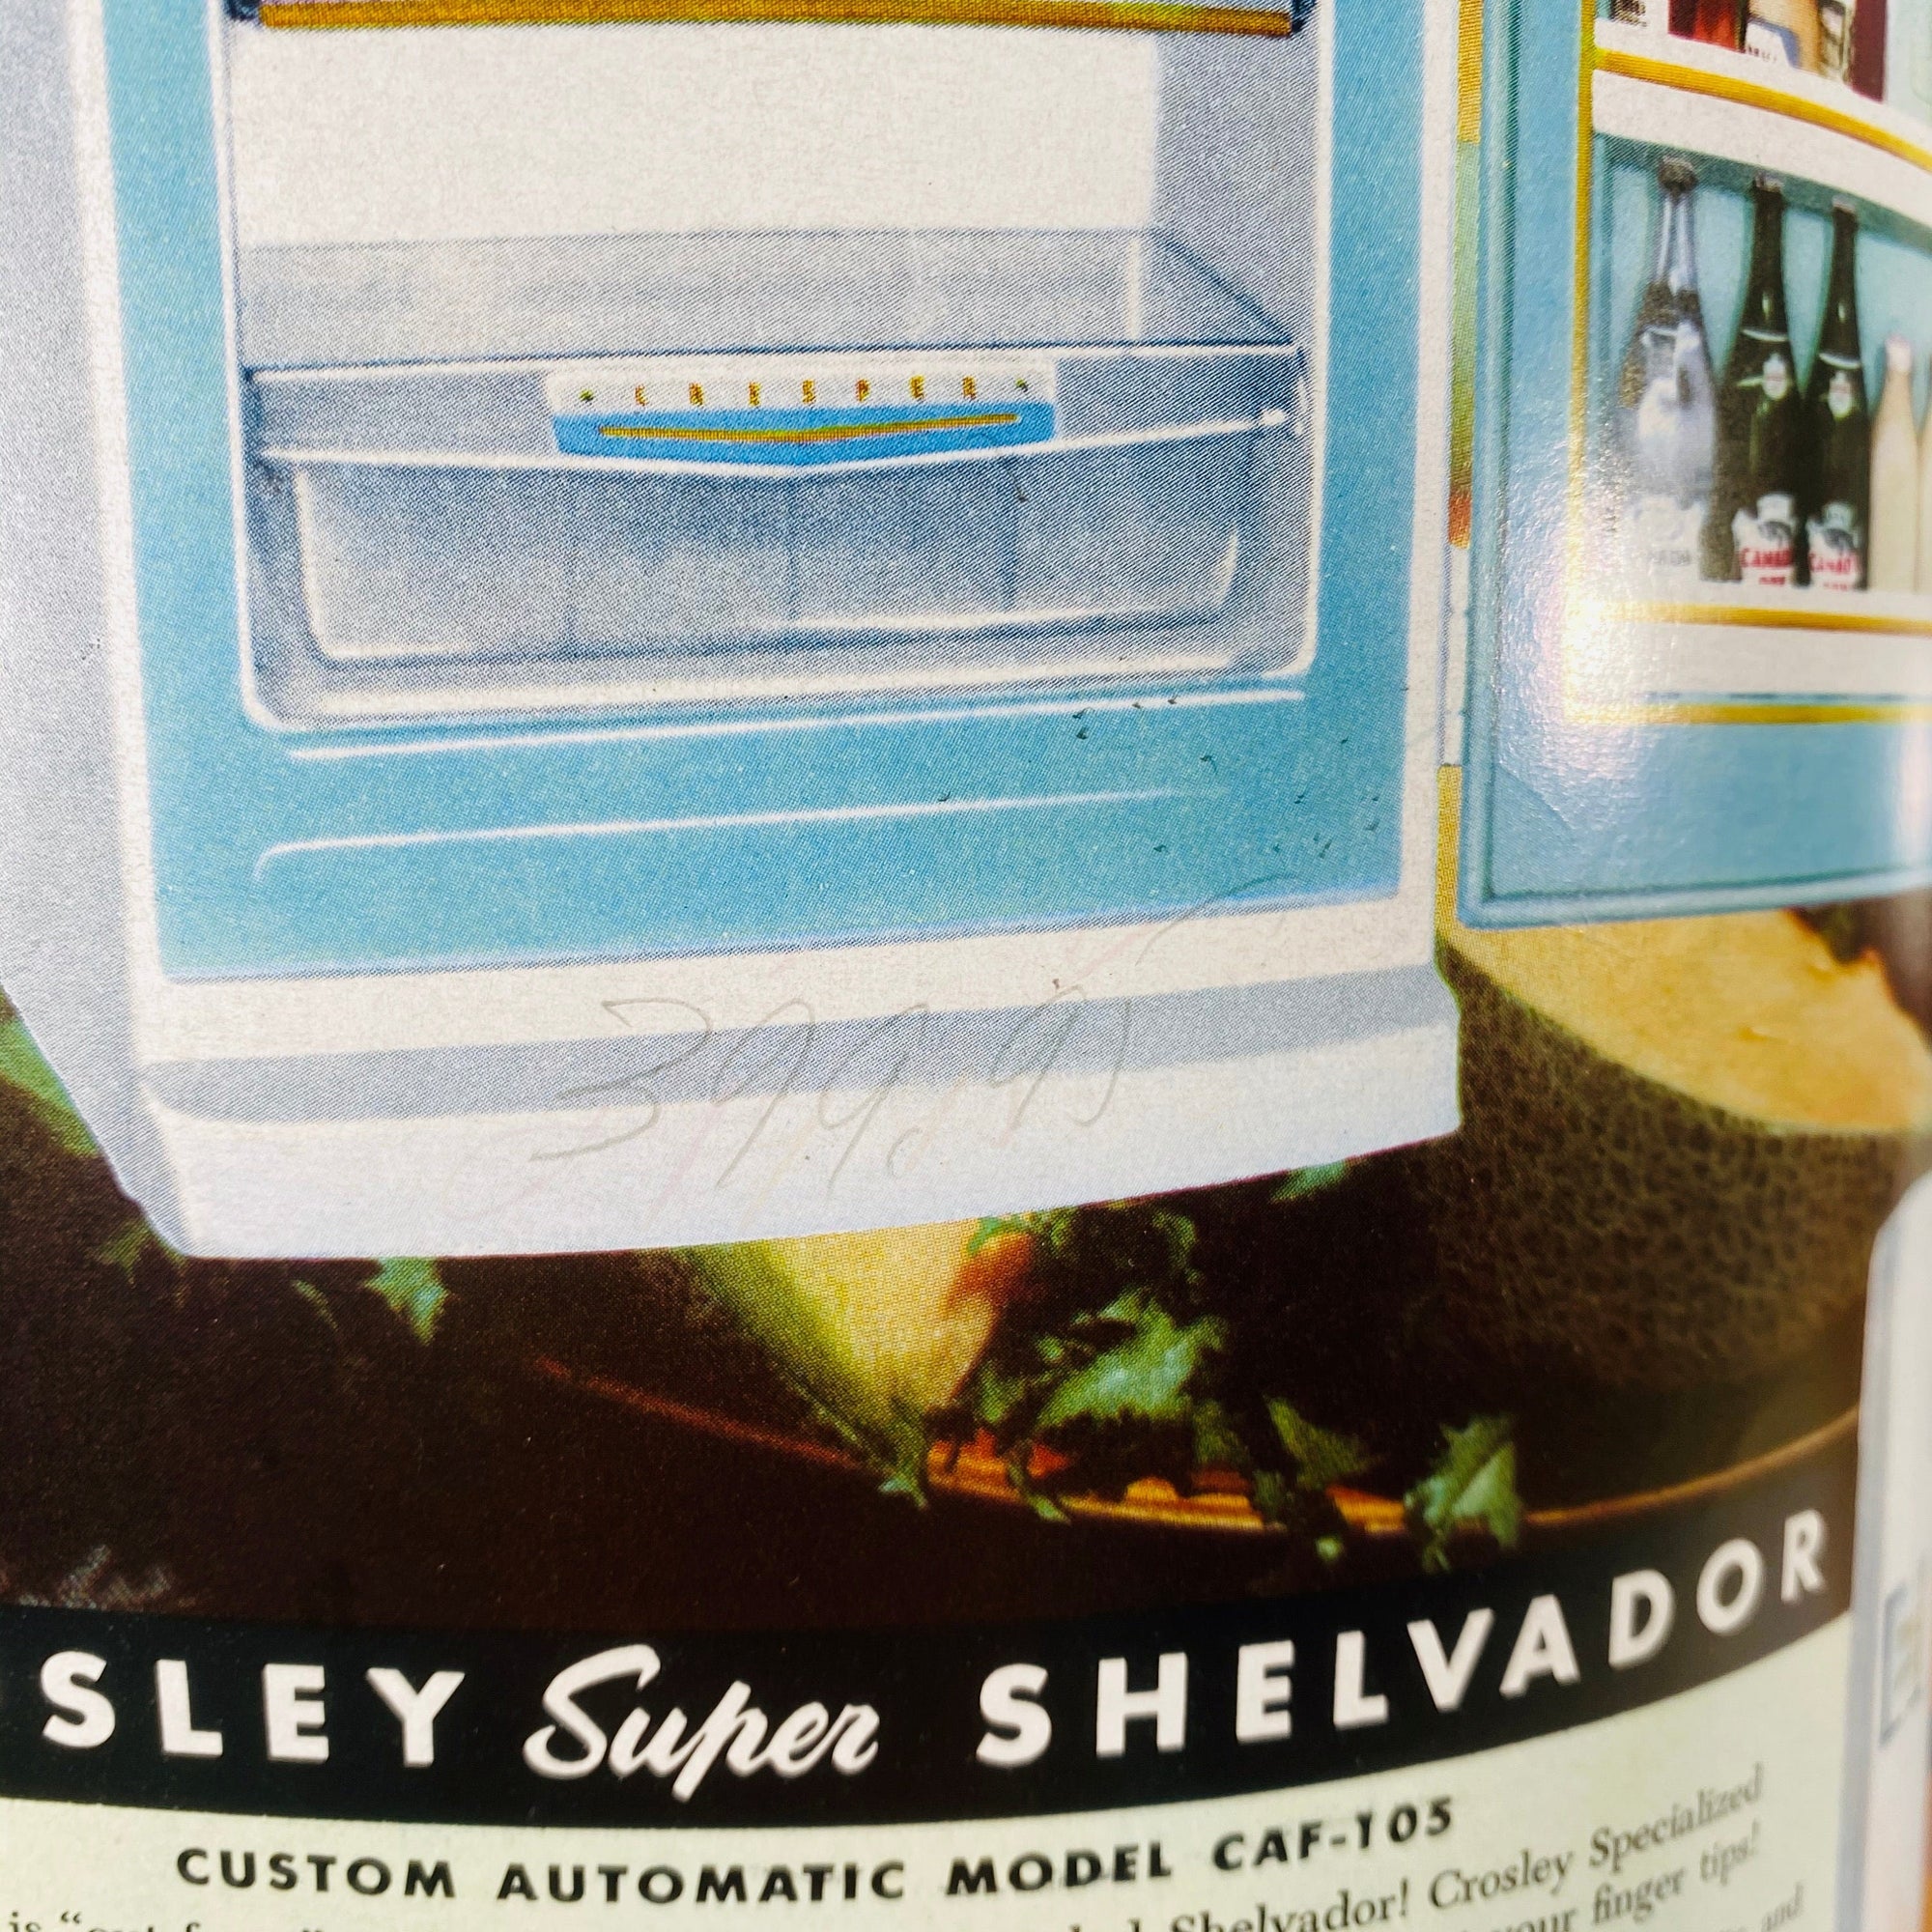 Advertising Pamphlet for Crosby Super Shelvador Refrigerator by The Crosley Appliance and Electronics Division 1953